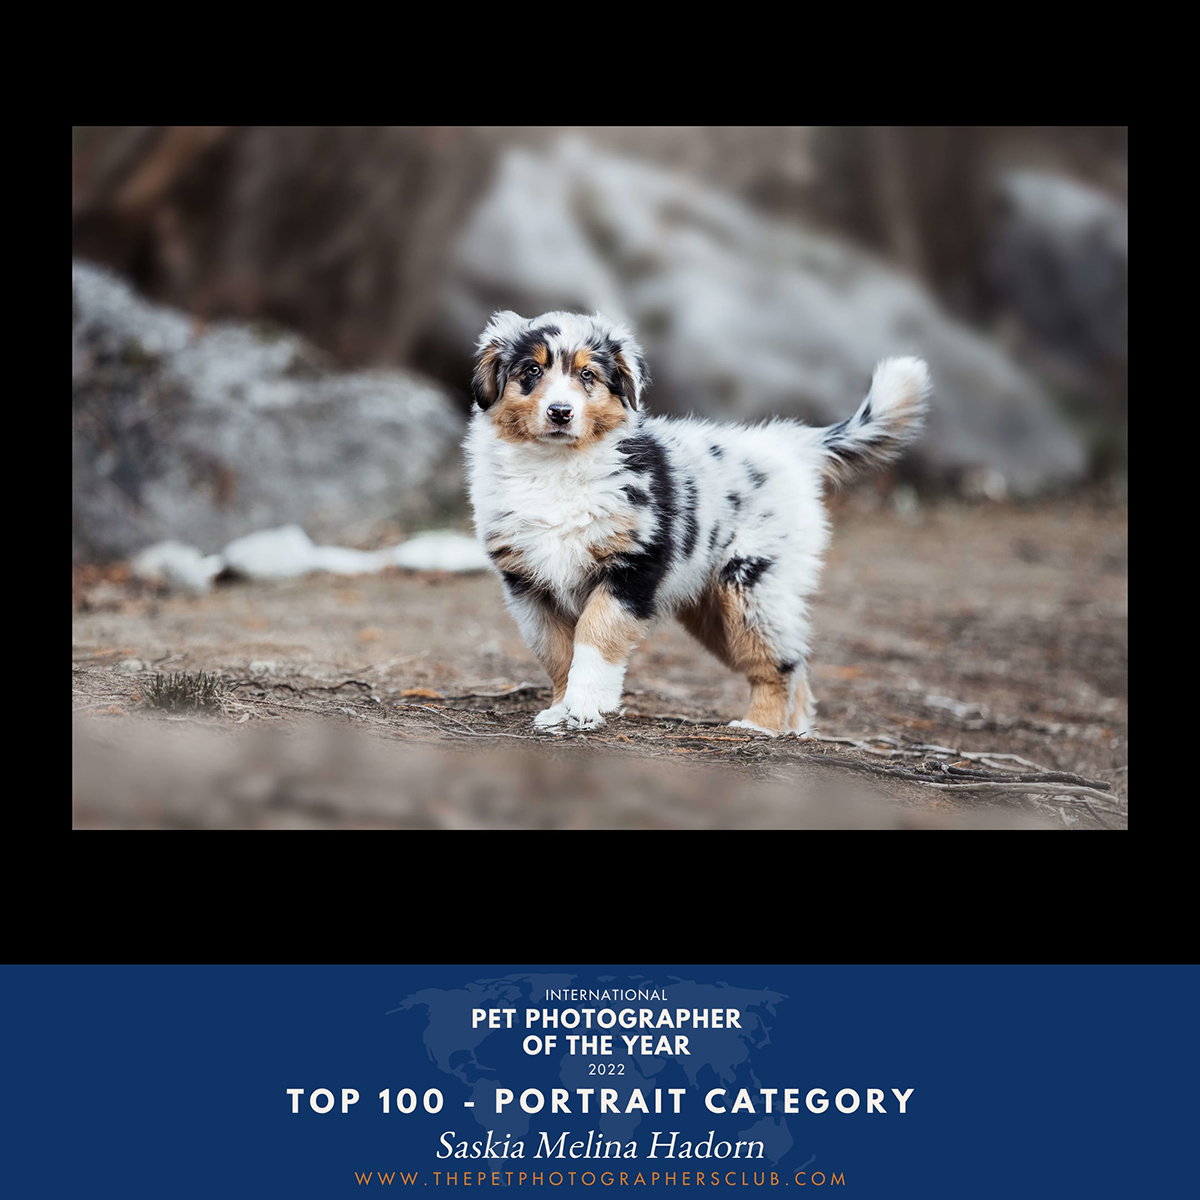 Pet Photographer of the Year Award 2022, Category Portrait, Top 100